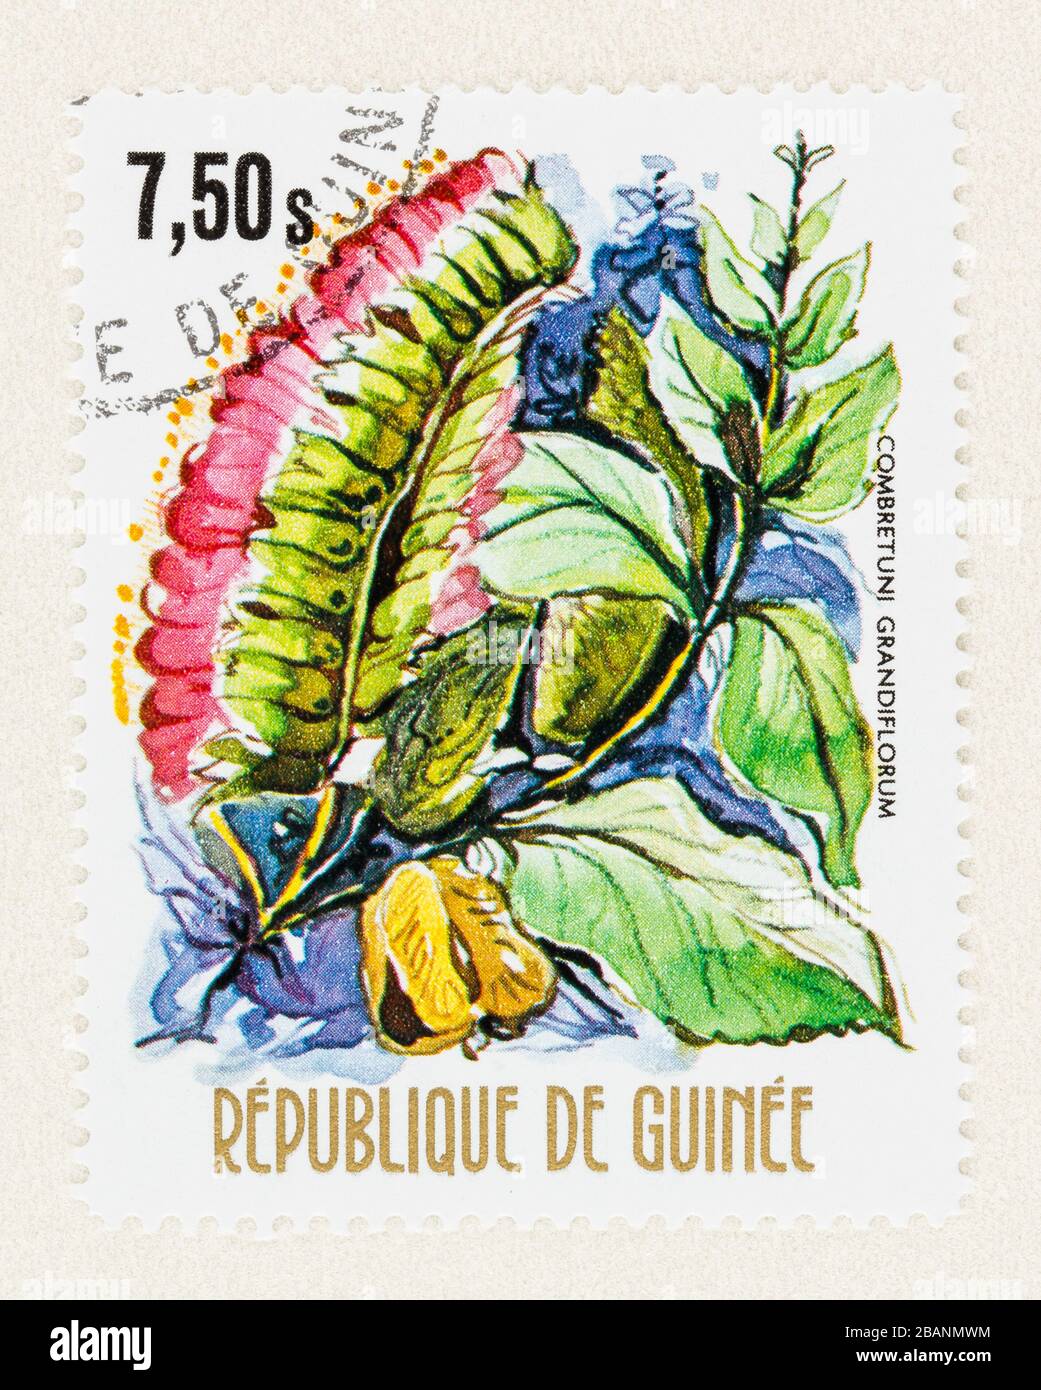 SEATTLE WASHINGTON - March 27, 2020: Close up of used Republic of Guinee postage stamp featuring Combretuni grandiflorum native vine. Stock Photo